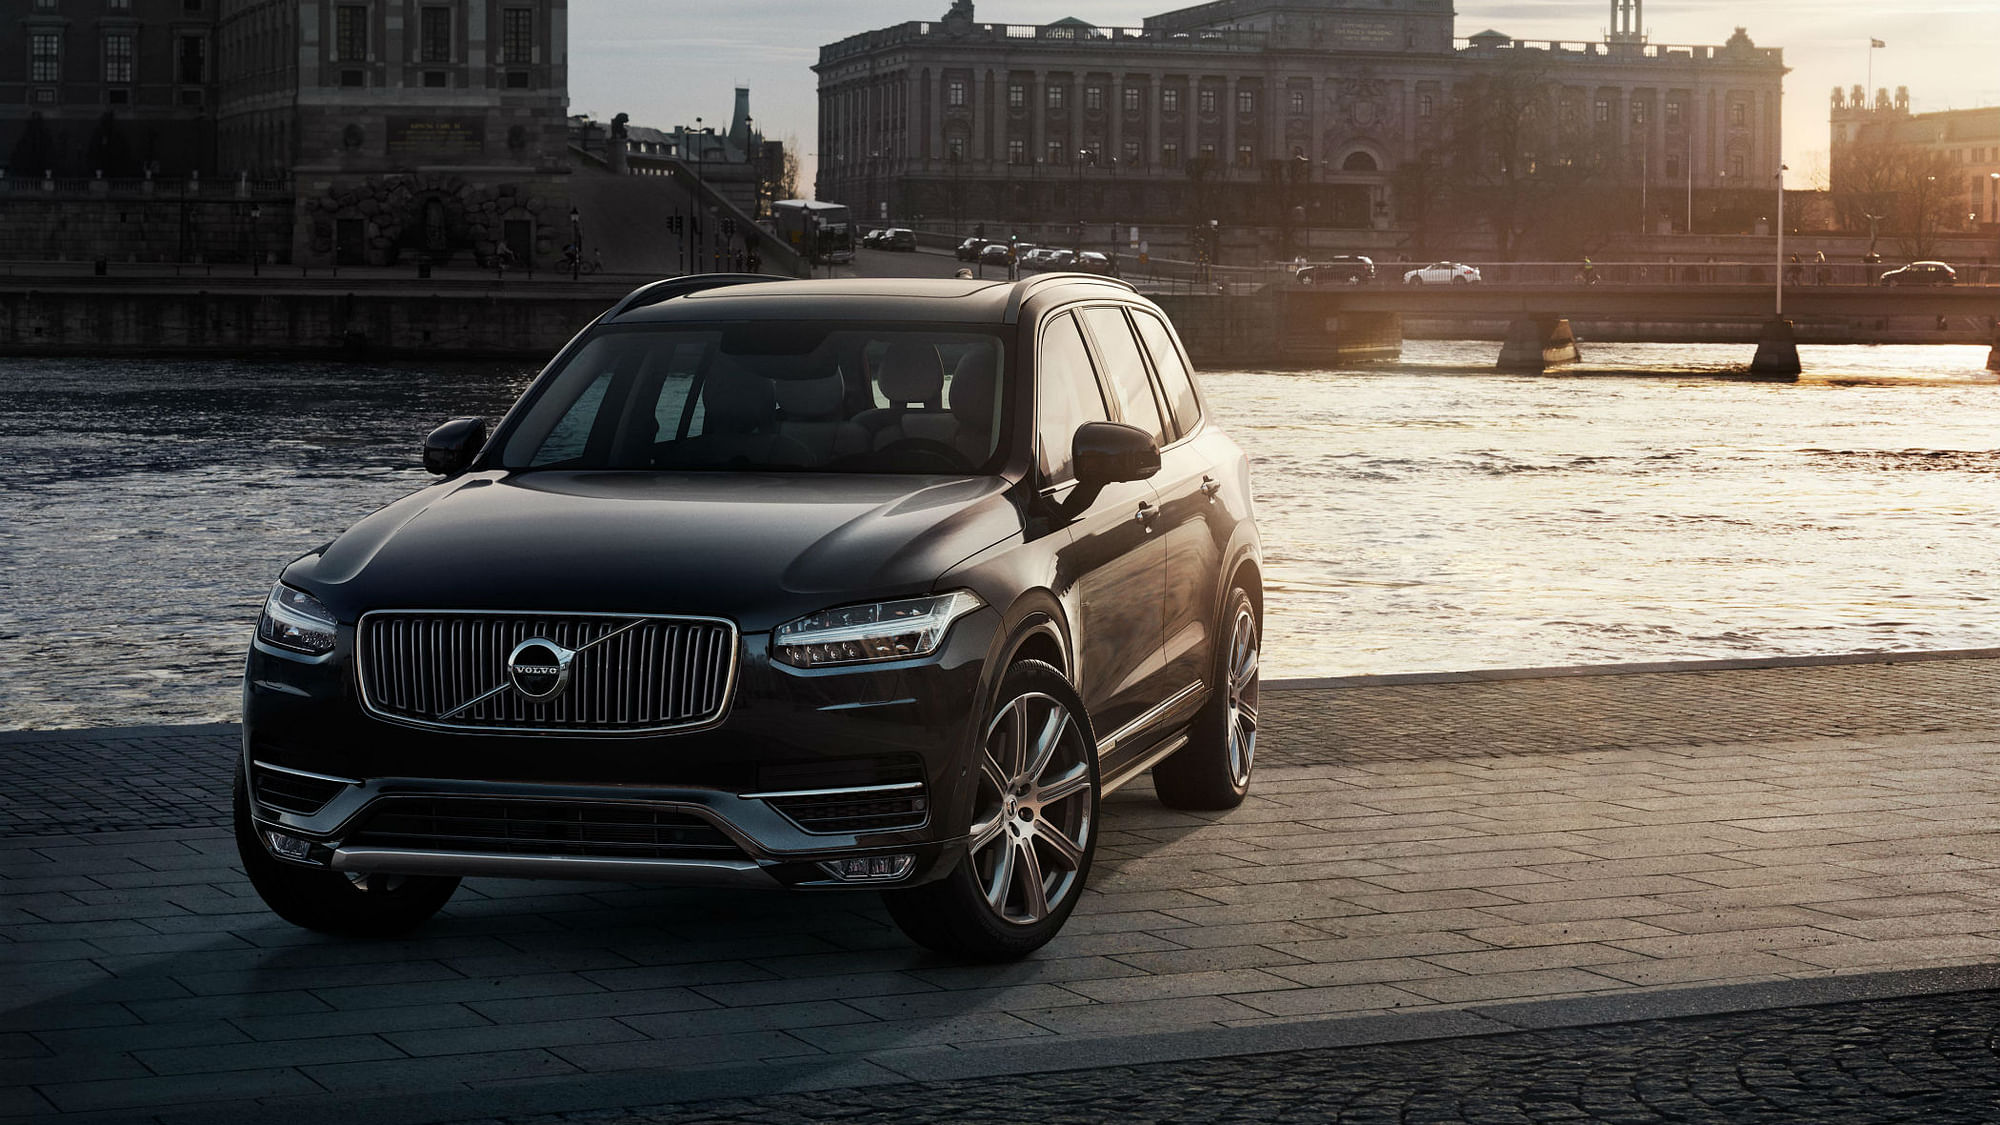 Volvo XC90 T8 is luxury on the wheels. (Photo Courtesy: <a href="http://www.volvocars.com/in/cars/new-models/xc90-excellence?utm_source=sendy&amp;utm_medium=mailer14sept">Volvo</a>)